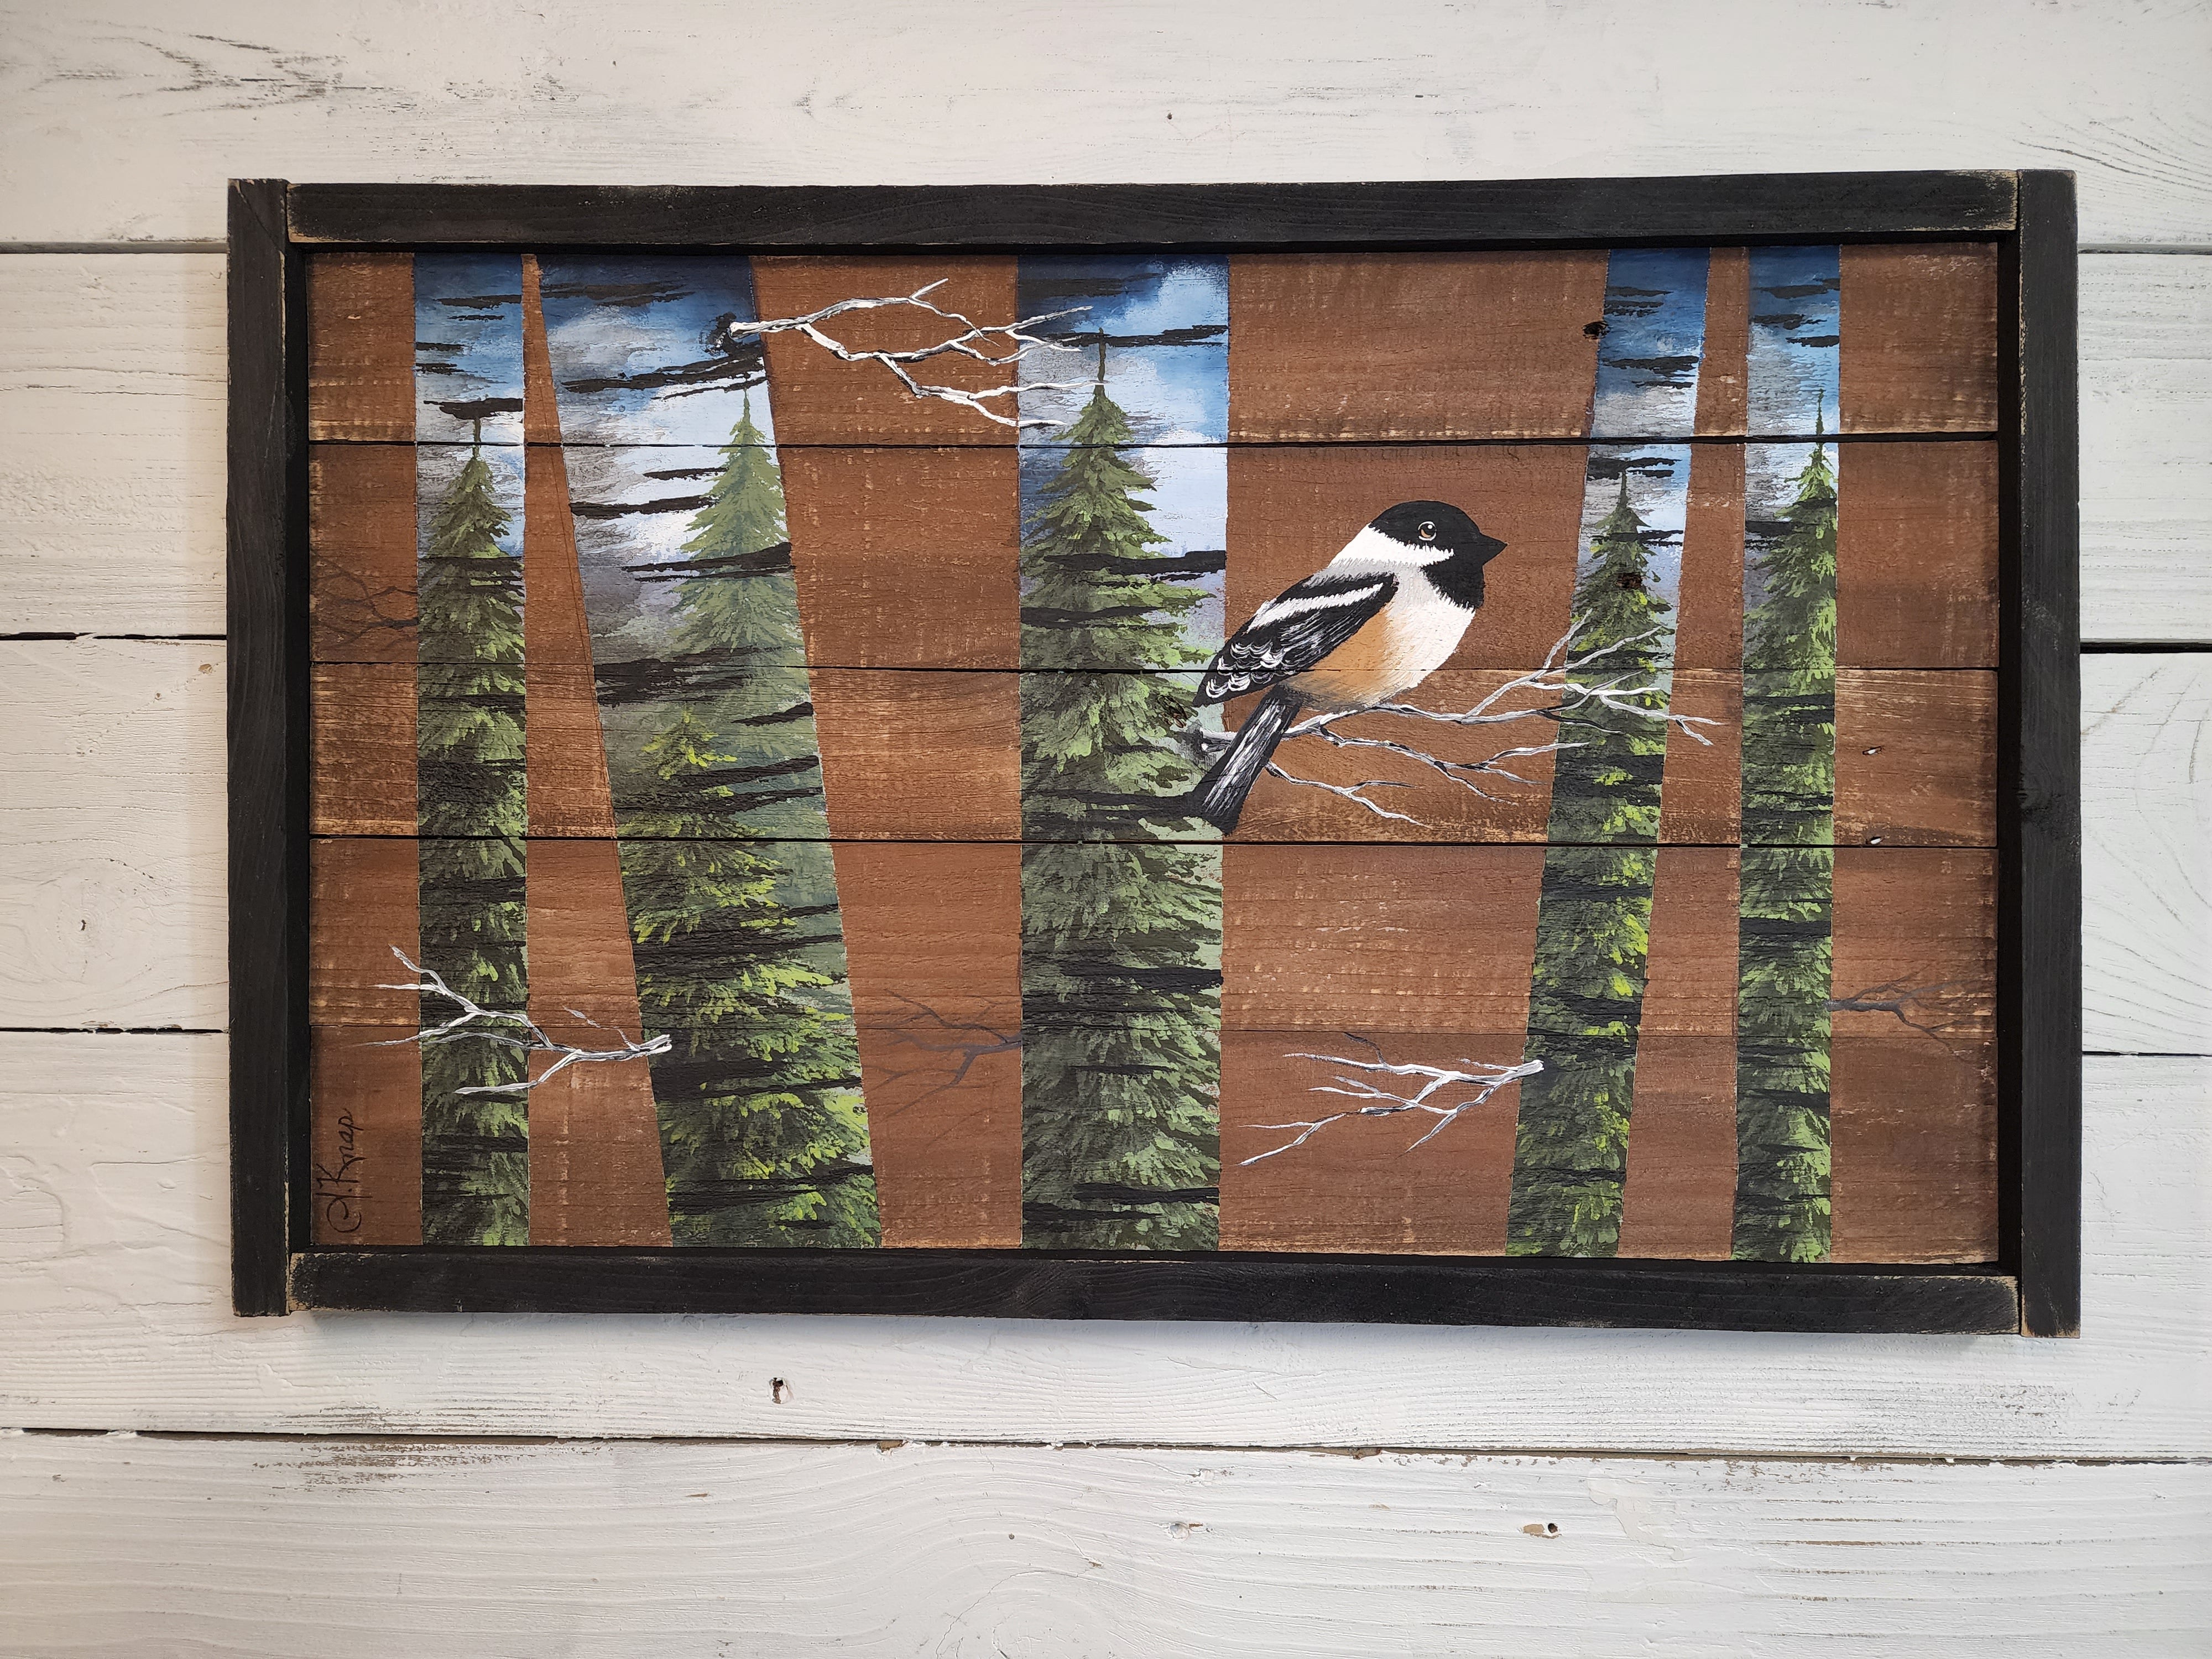 Abstract White Birch wall art Painting, part of "Birch Reflections" collection, Pine tree painting on pallet wood with chickadee